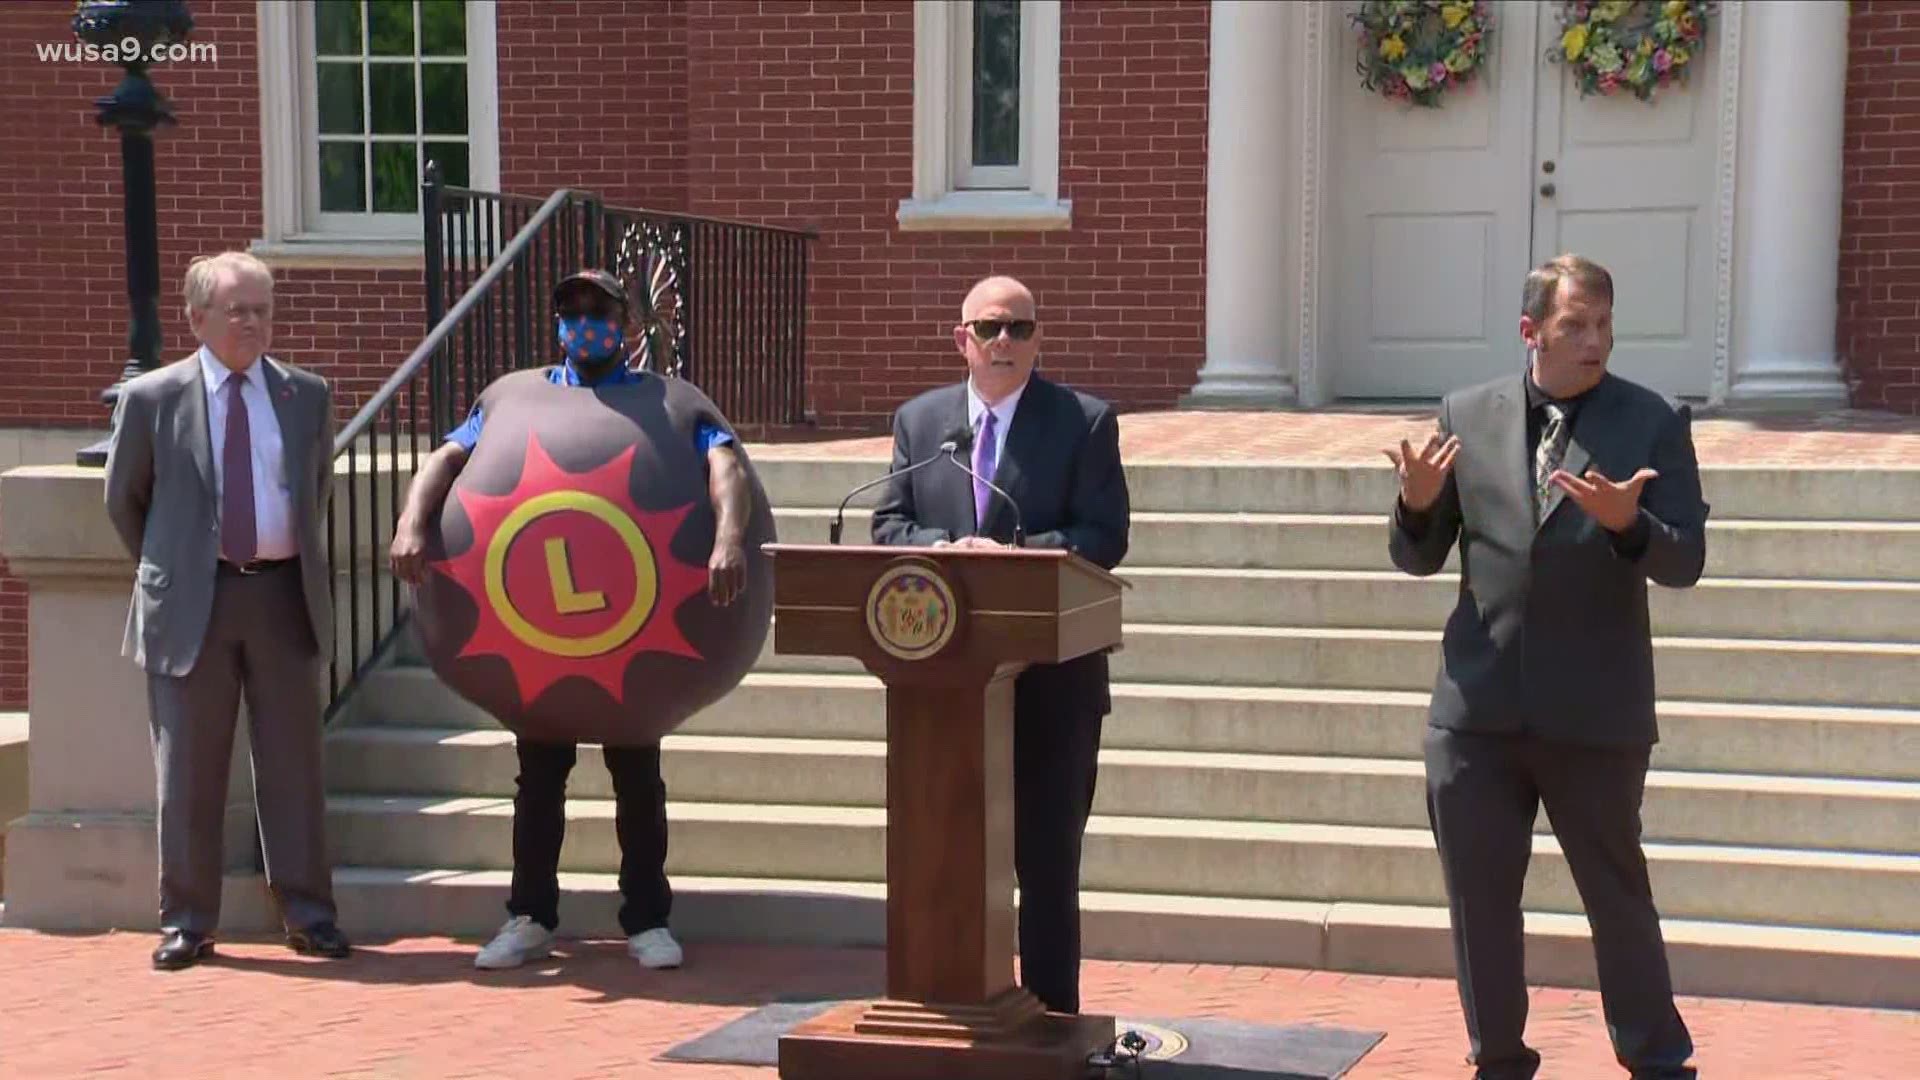 Gov. Hogan announced a new initiative to give away $40,000 a day to a vaccinated Marylander for 40 days. A $400,000 grand prize drawing will occur on July 4.